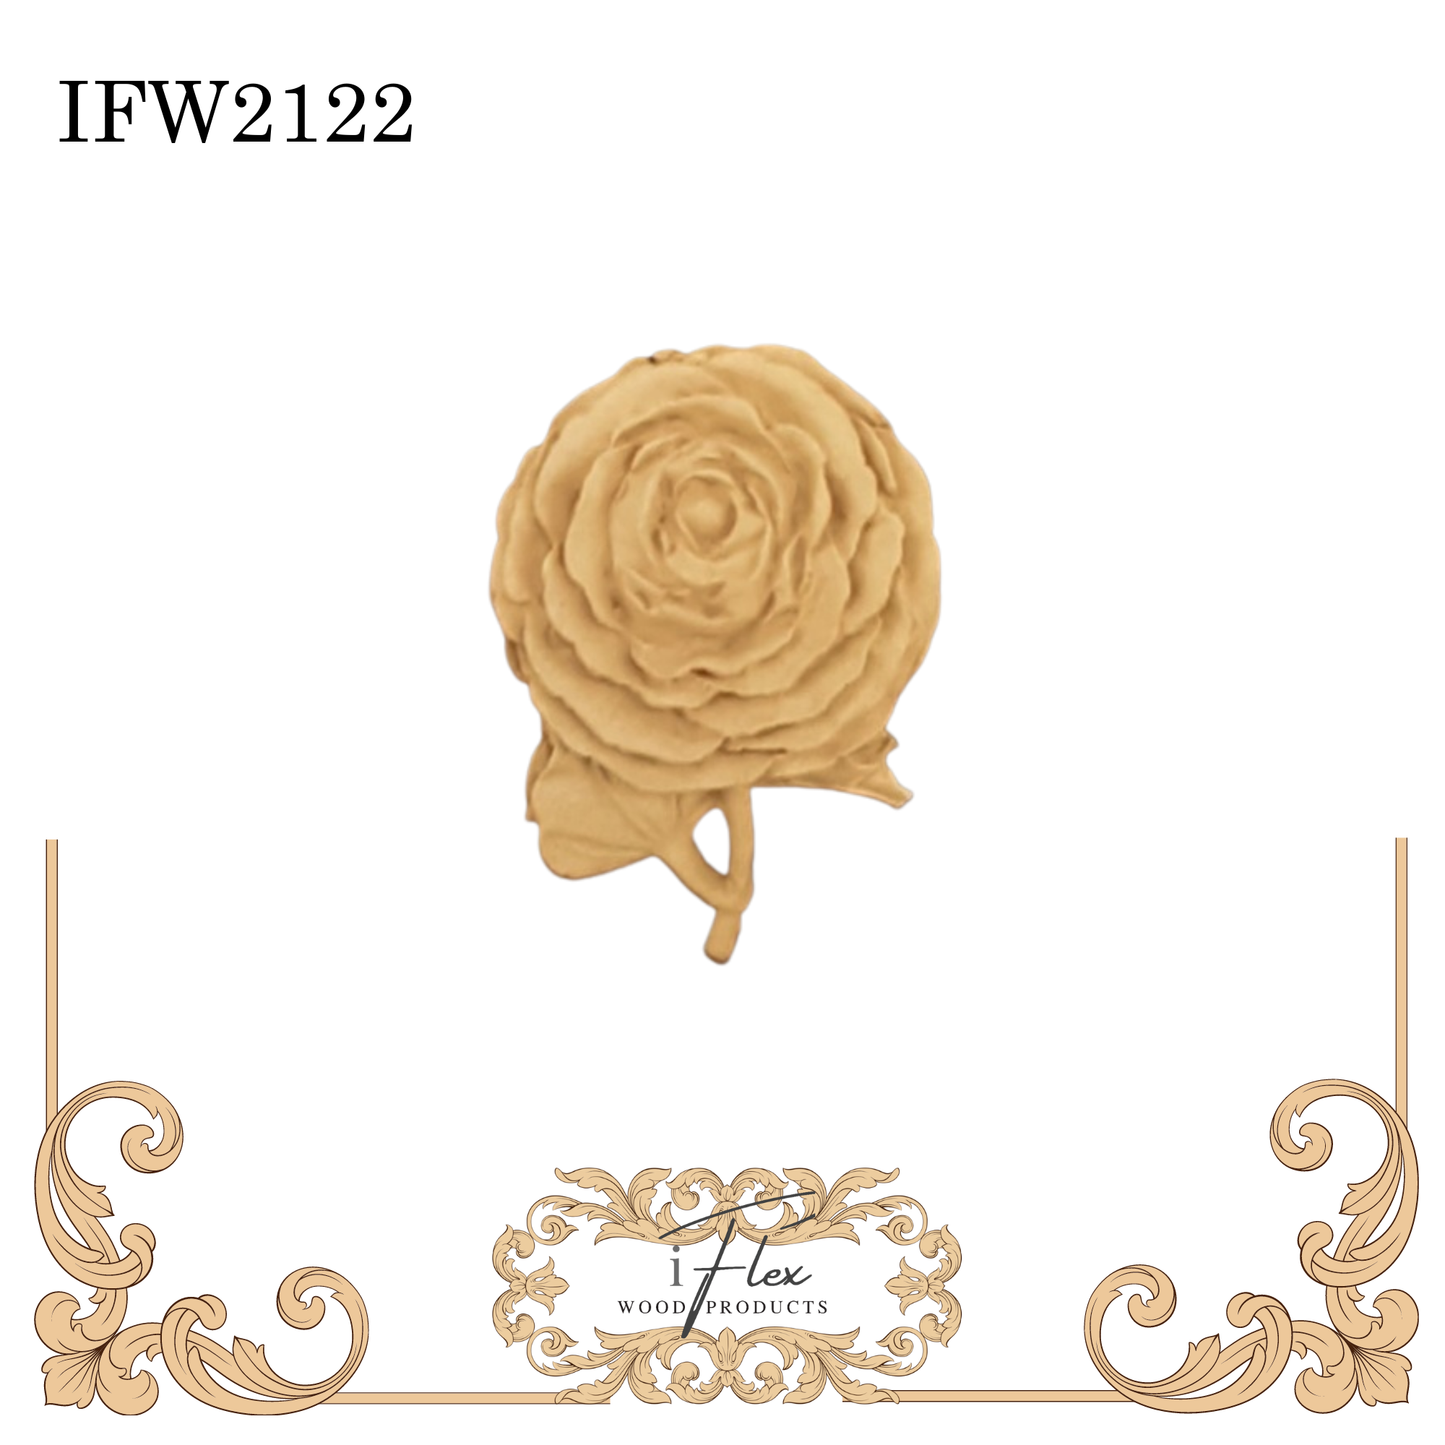 IFW 2122 iFlex Wood Products, bendable mouldings, flexible, wooden appliques, flower